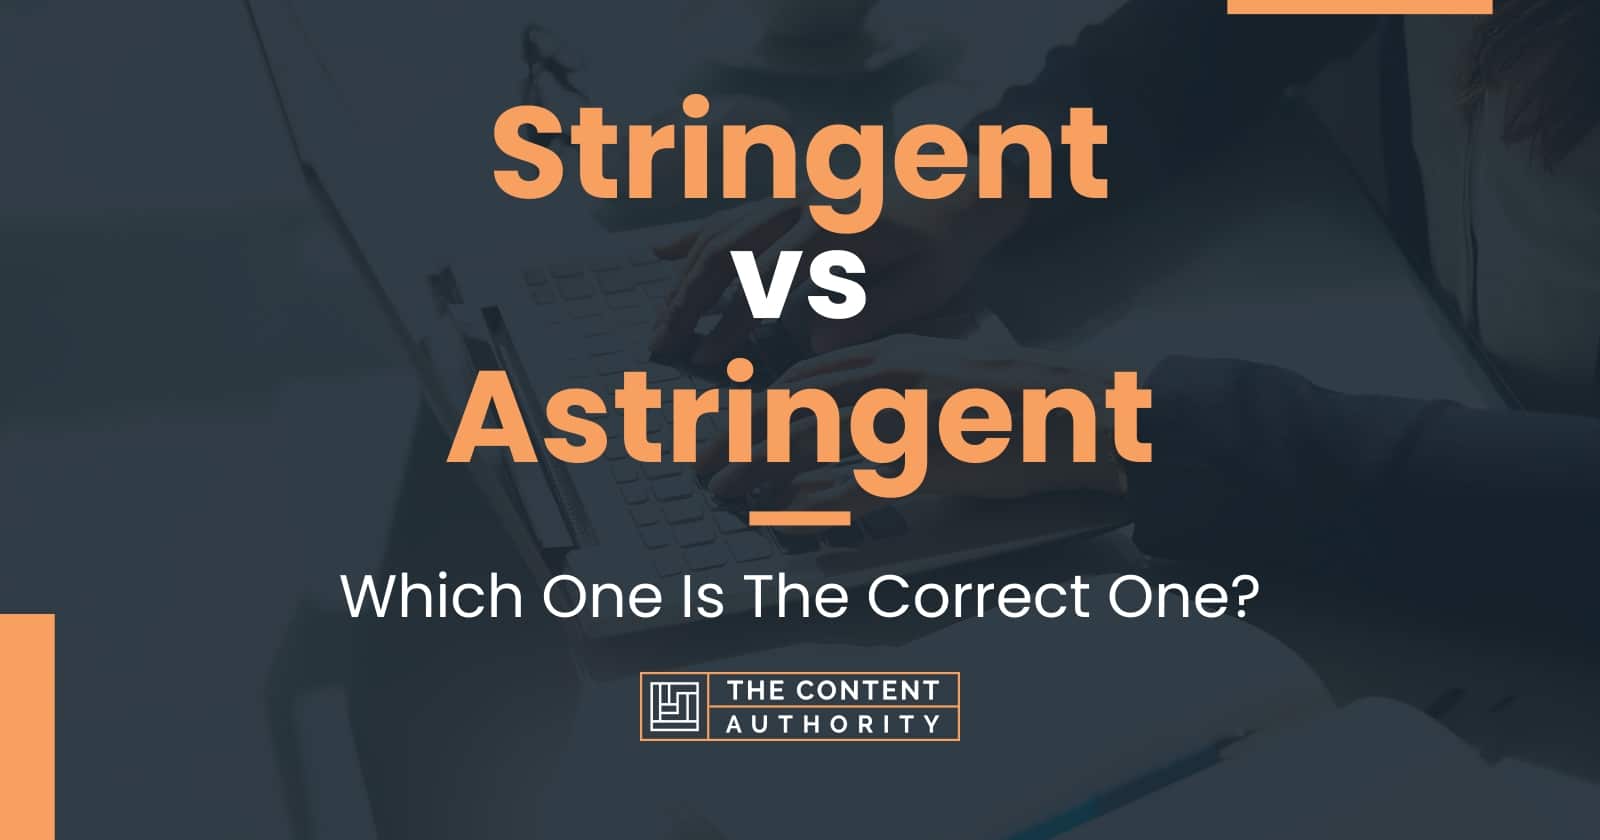 Stringent vs Astringent: Which One Is The Correct One?